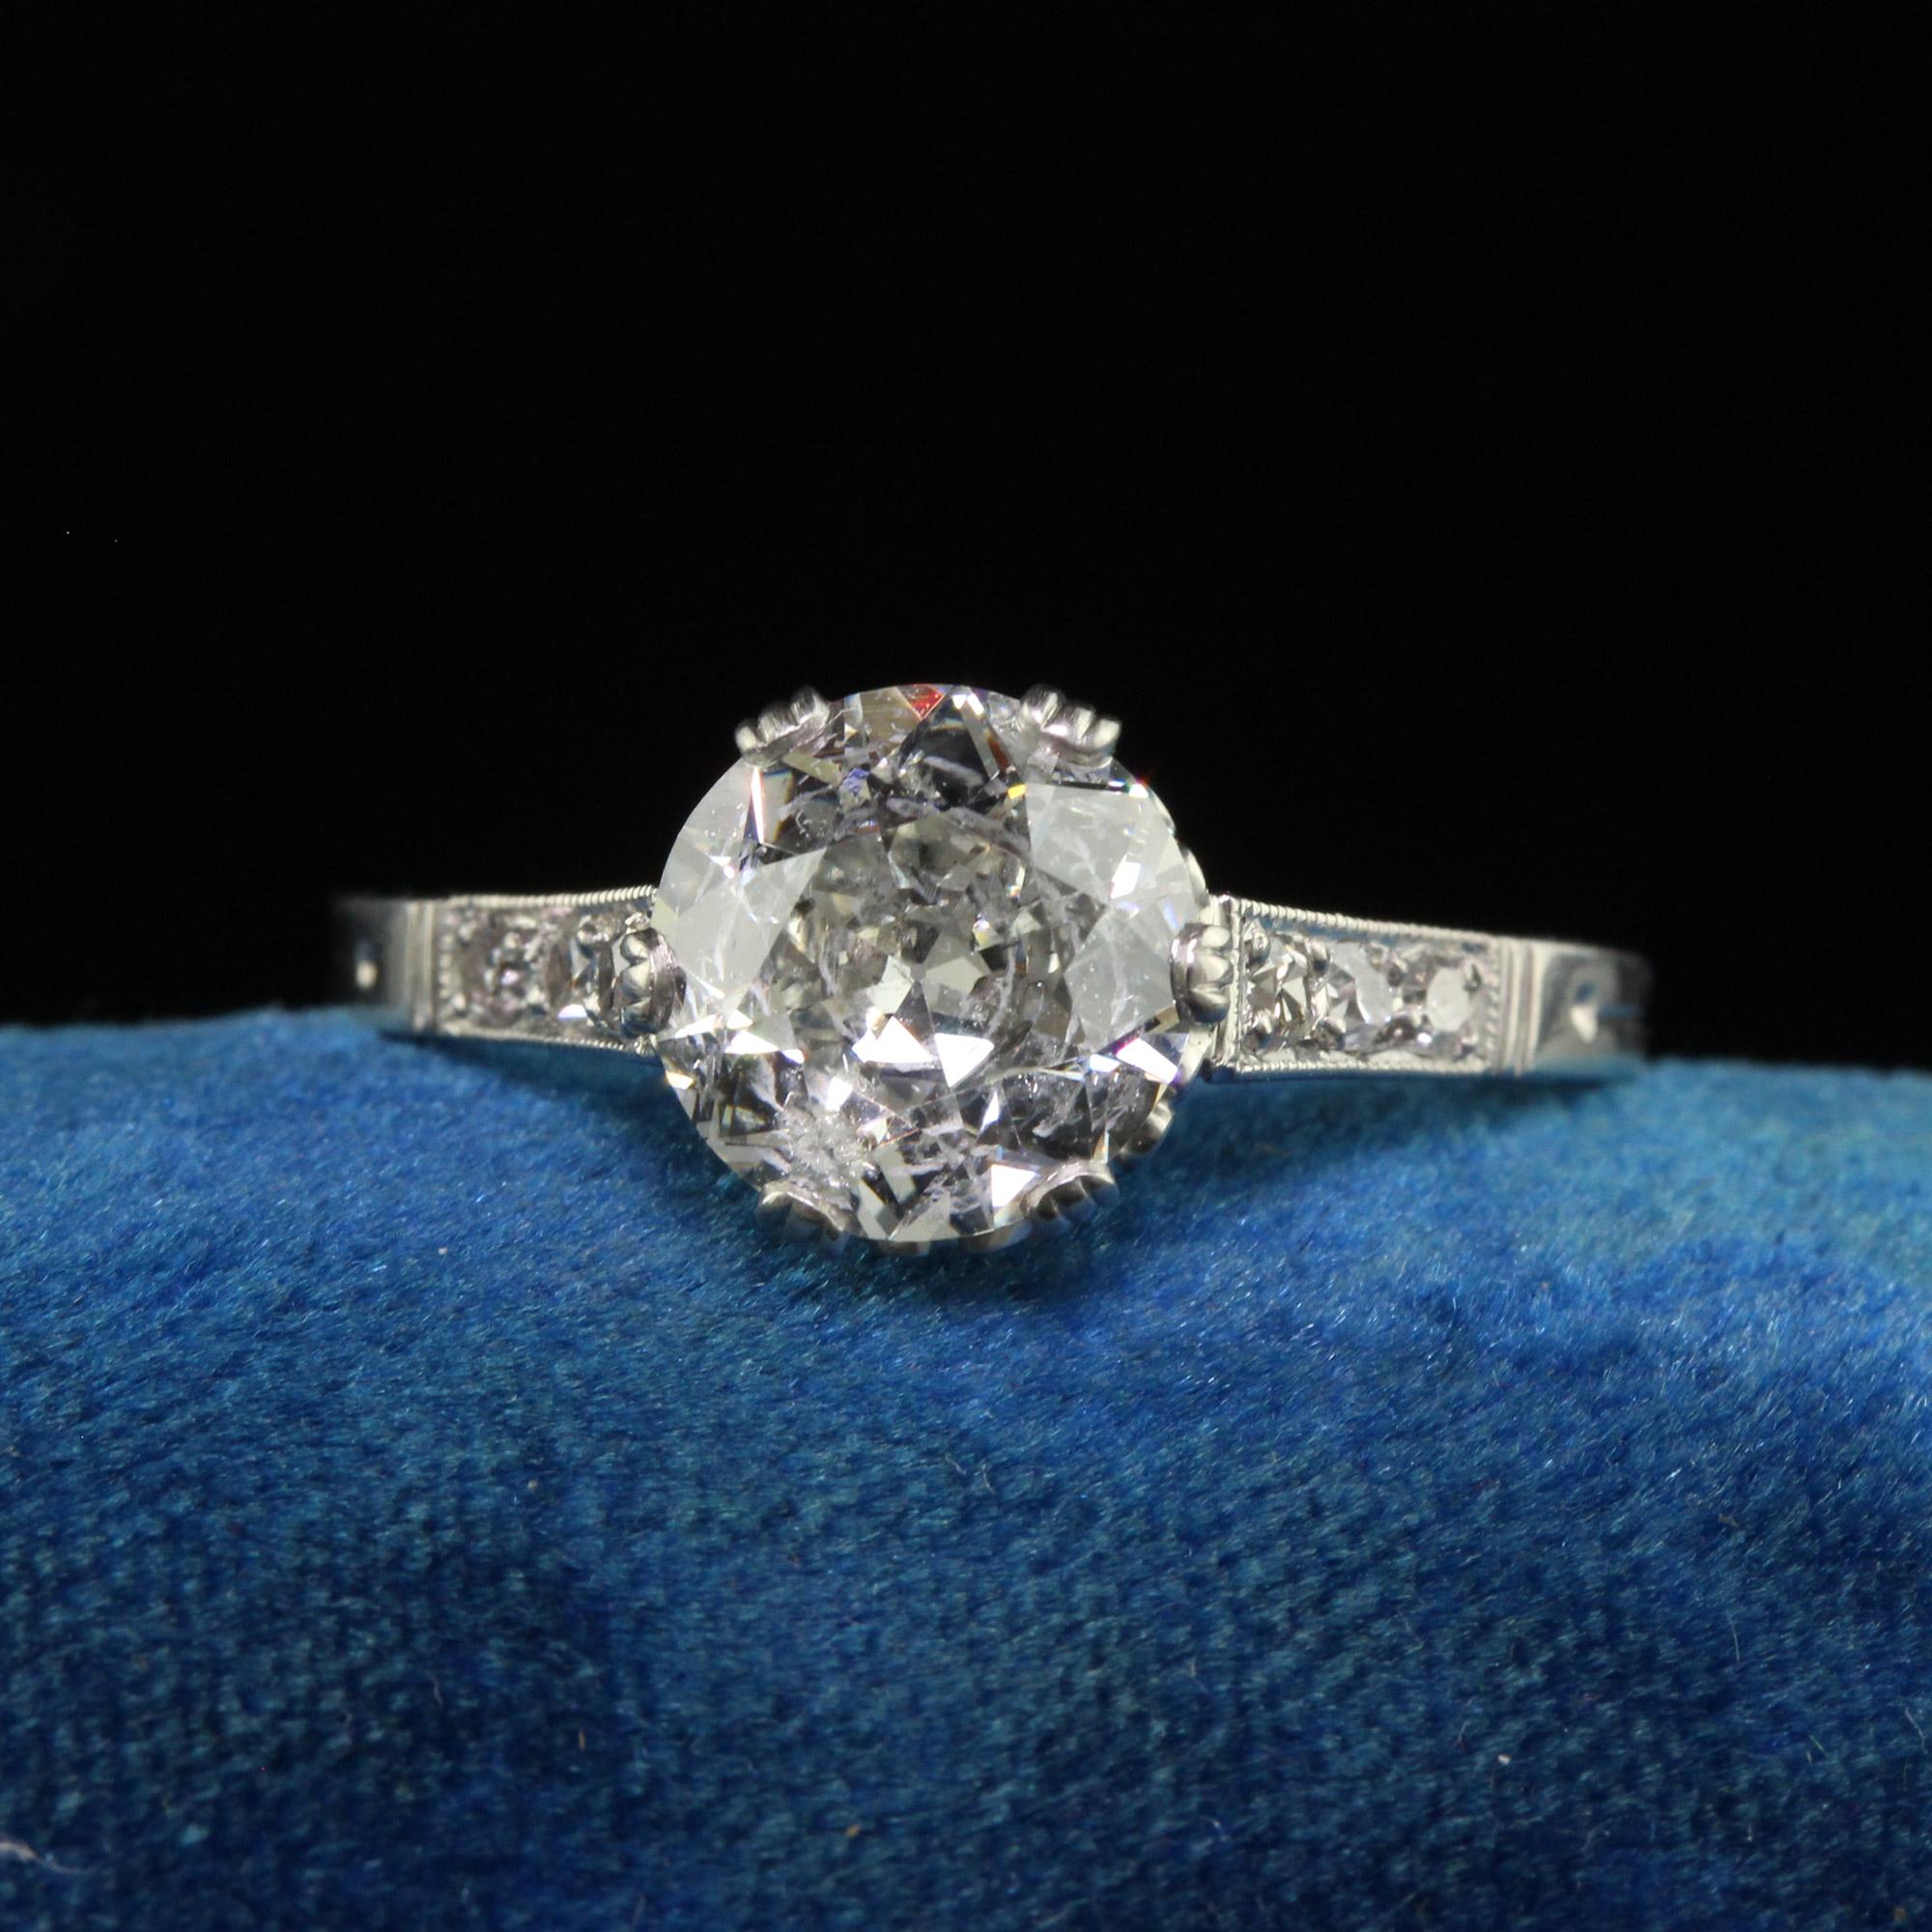 Beautiful Antique Art Deco Platinum Old European Cut Diamond Engagement Ring - GIA. This classic antique engagement ring is crafted in platinum. The center diamond is an old European cut and has a GIA report. The diamond is set in a gorgeous art